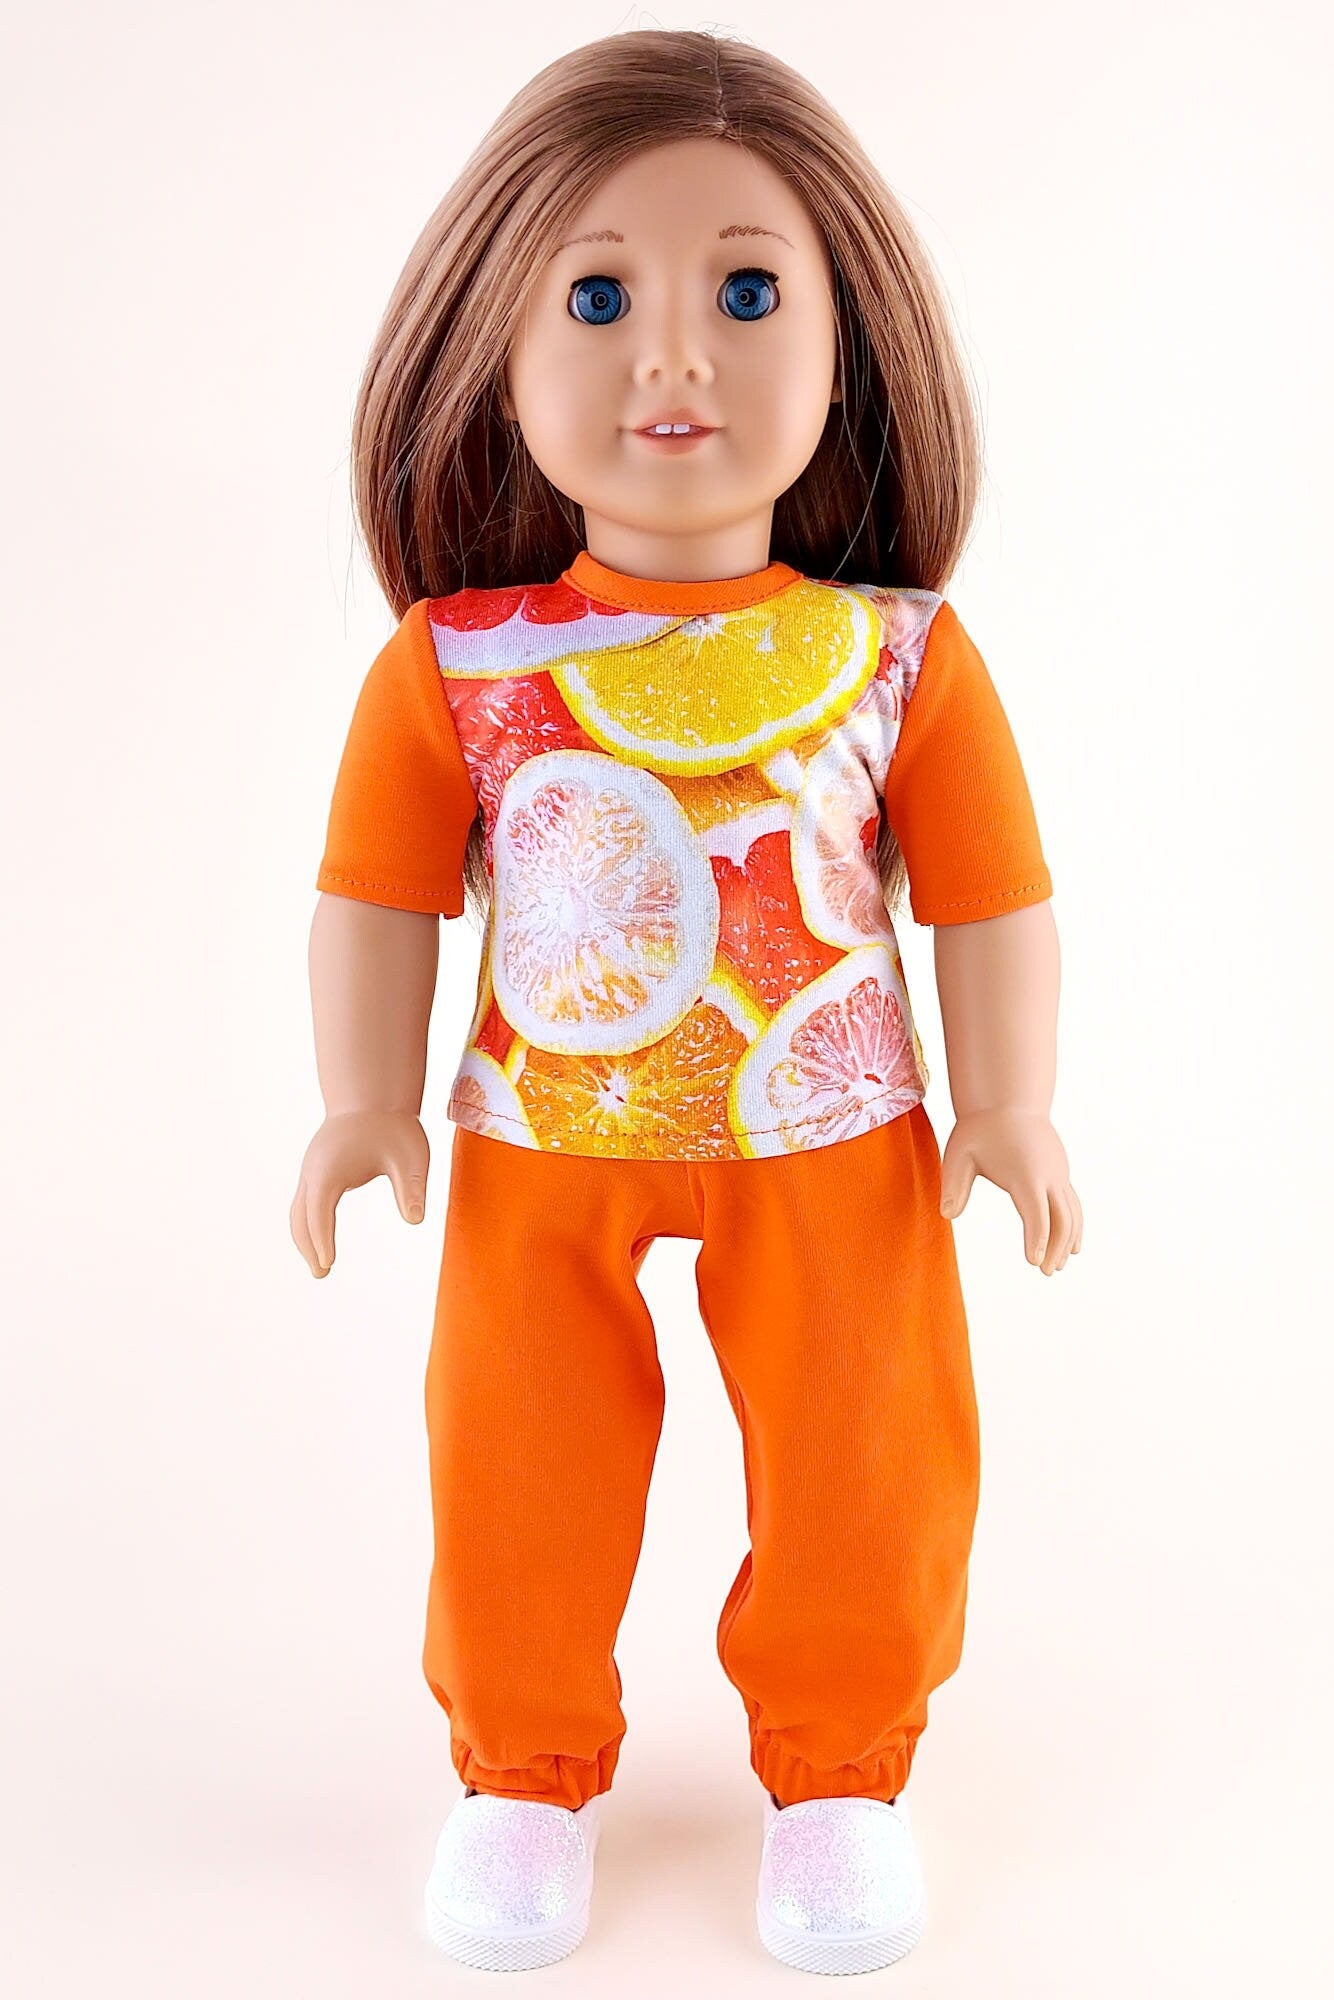 American Girl Doll Pajama Orange Sweatpants and T-shirt for Dolls 18 I – My  Kind Toys